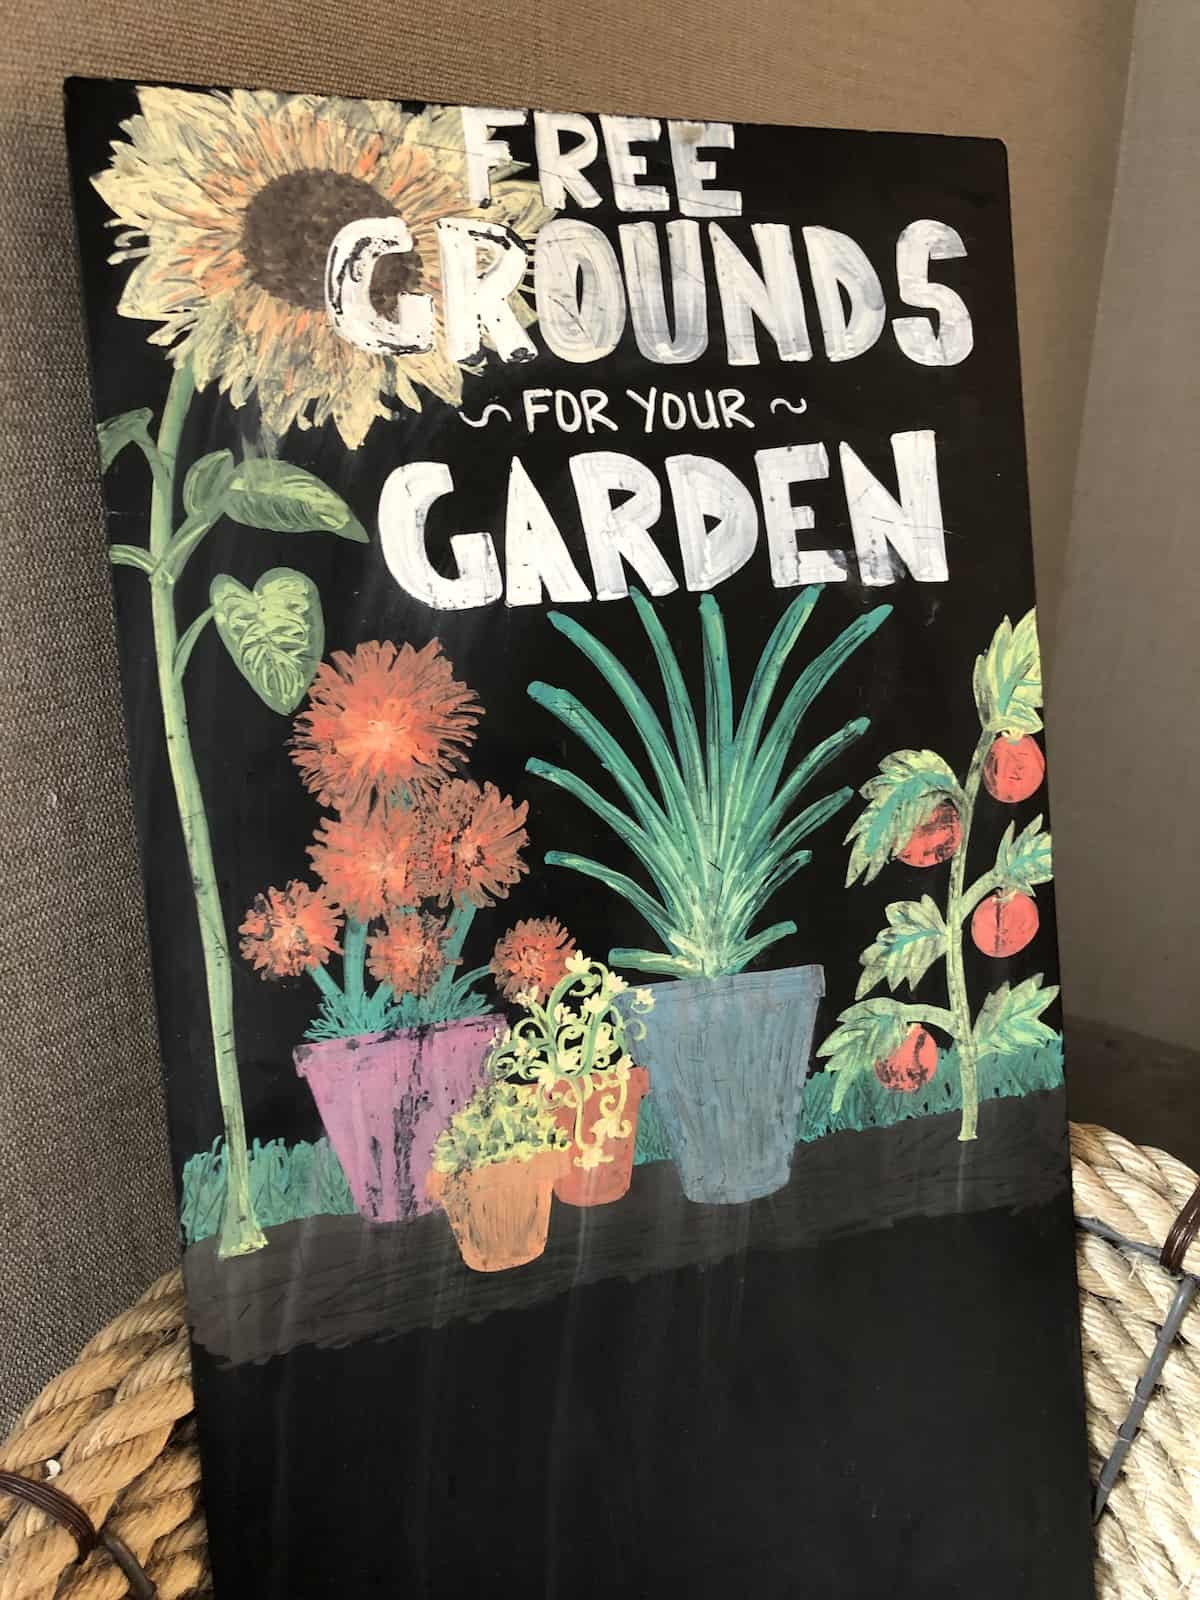 Free coffee grounds for you garden from starbucks - basket and sign